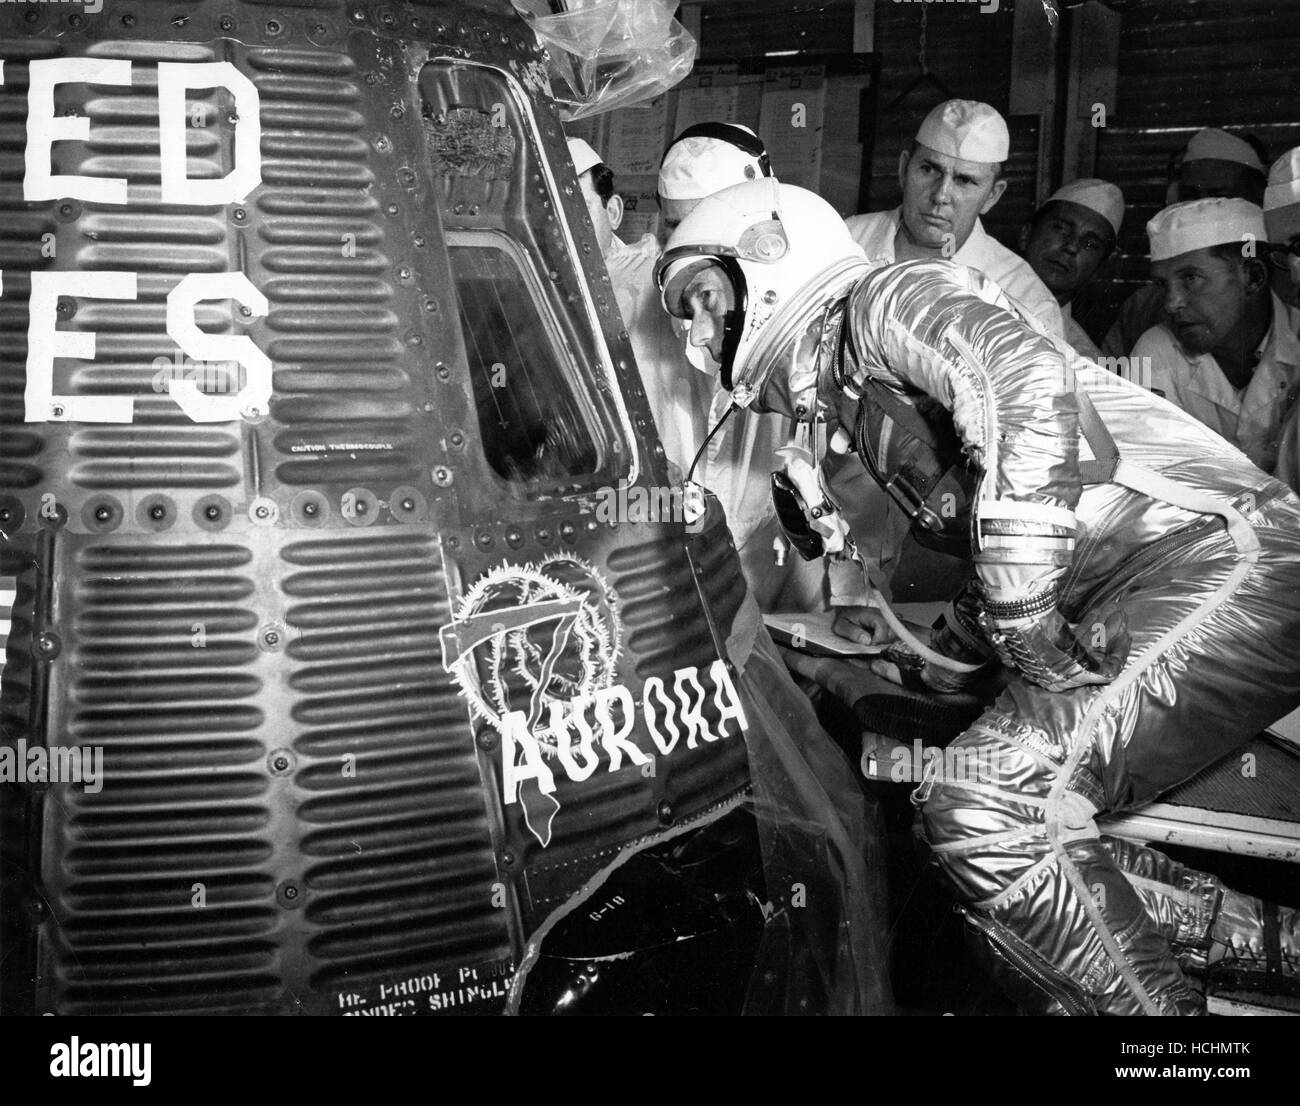 Astronaut Scott Carpenter looks inside the Aurora 7 spacecraft prior to insertion. McDonnell and NASA capsule technicians along with Astronaut Wally Schirra and John Glenn watch Carpenter prepare for his programmed three-orbit mission at Cape Canaveral, Florida, May 24, 1962. Credit: NASA via CNP /MediaPunch Stock Photo